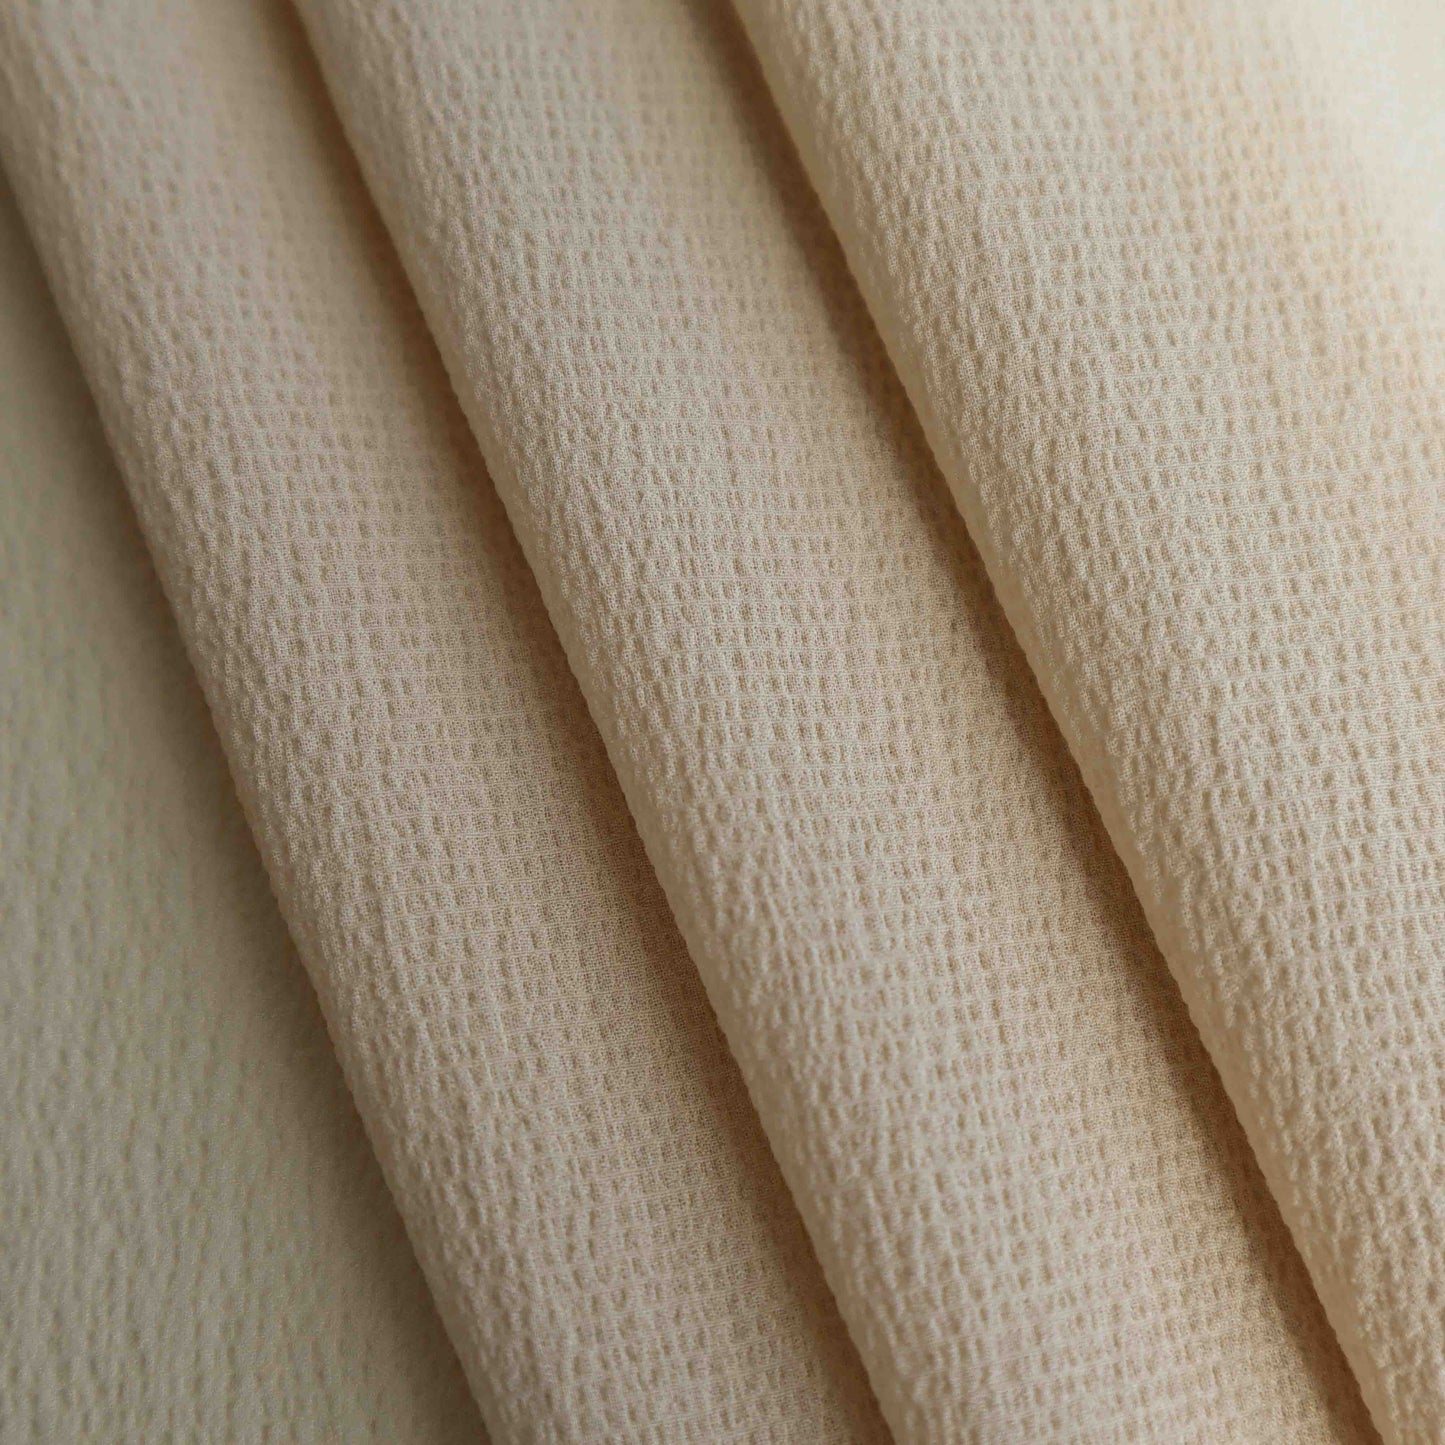 An European-made lightweight silk crepe in natural Shell. This fabric has a dry, smooth hand feel yet softens considerably after washing. This fluid-non stretch fabric has subtle texture throughout and matte finish.